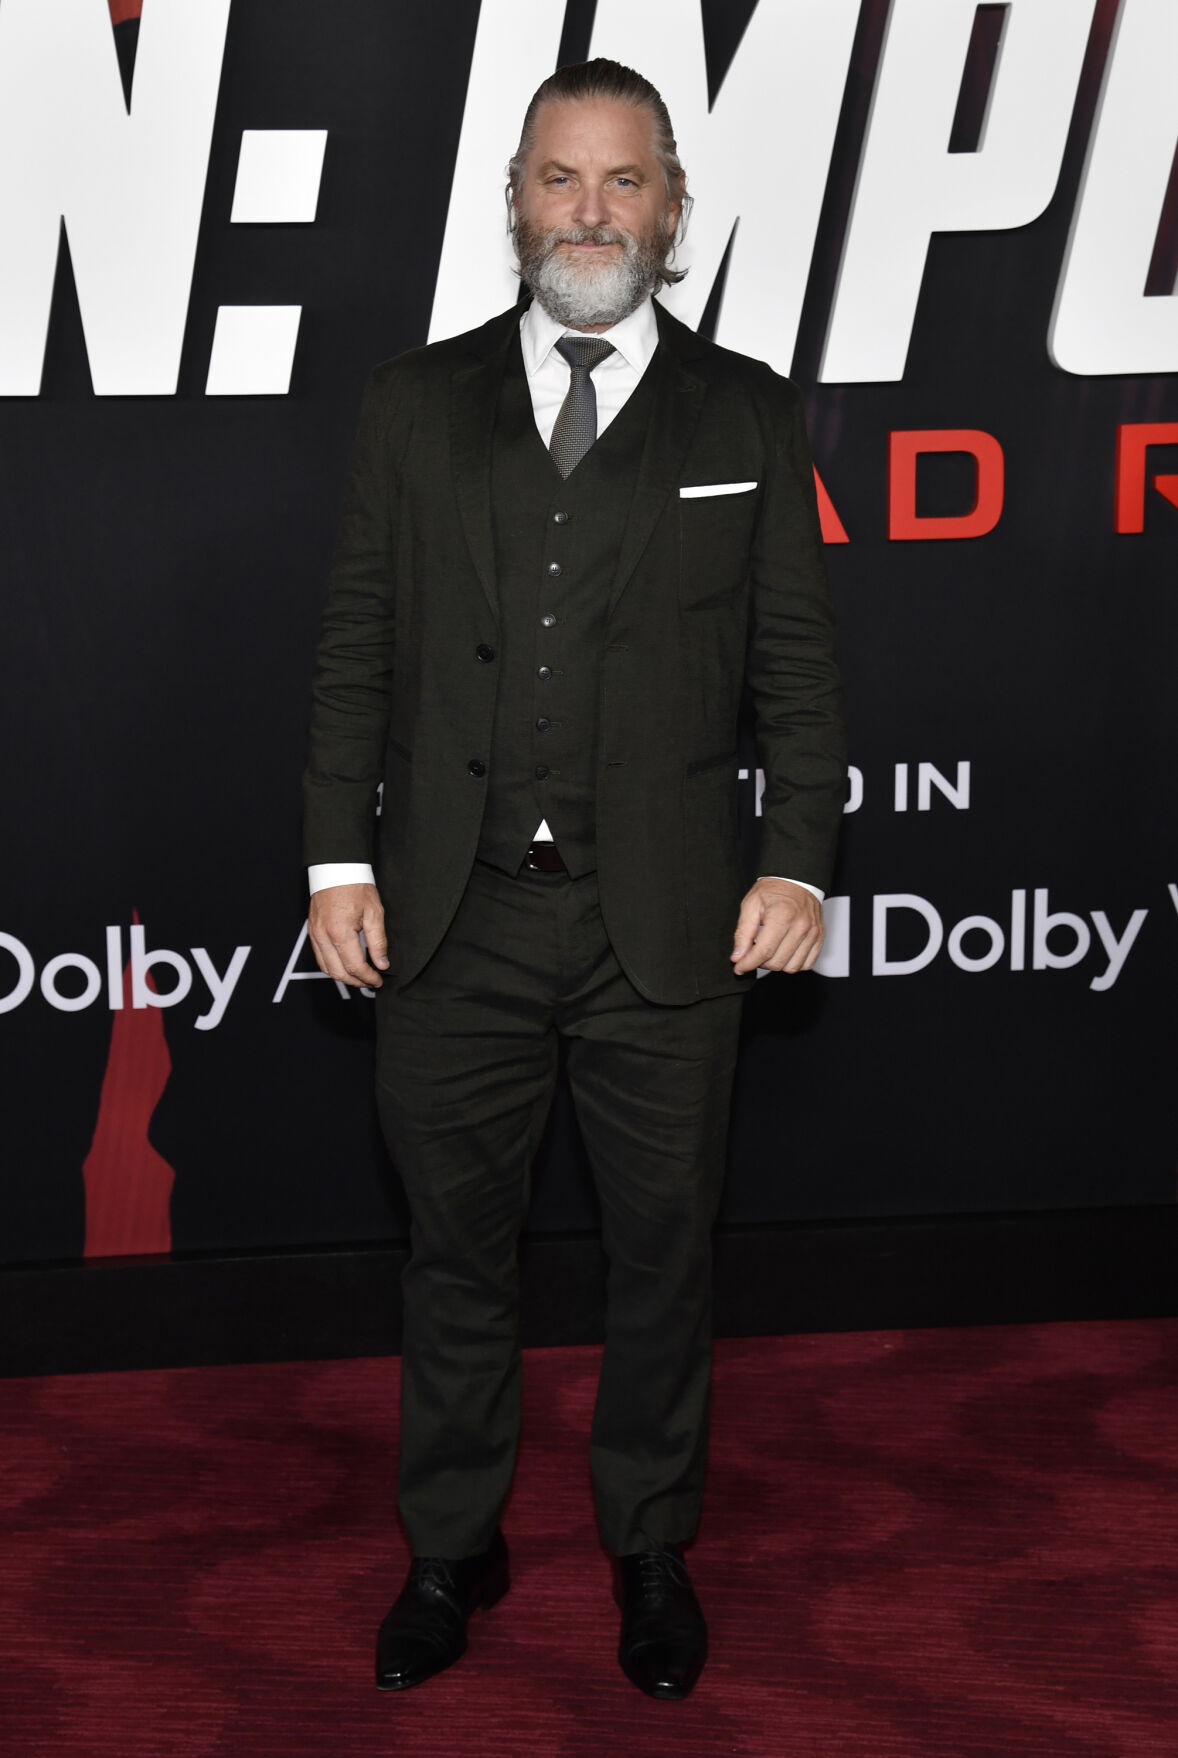 Shea Whigham at the premiere of "Mission: Impossible - Dead Reckoning Part One" held at Rose Theater, at Jazz at Lincoln Center's Frederick P. Rose Hall on July 10, 2023 in New York, New York.